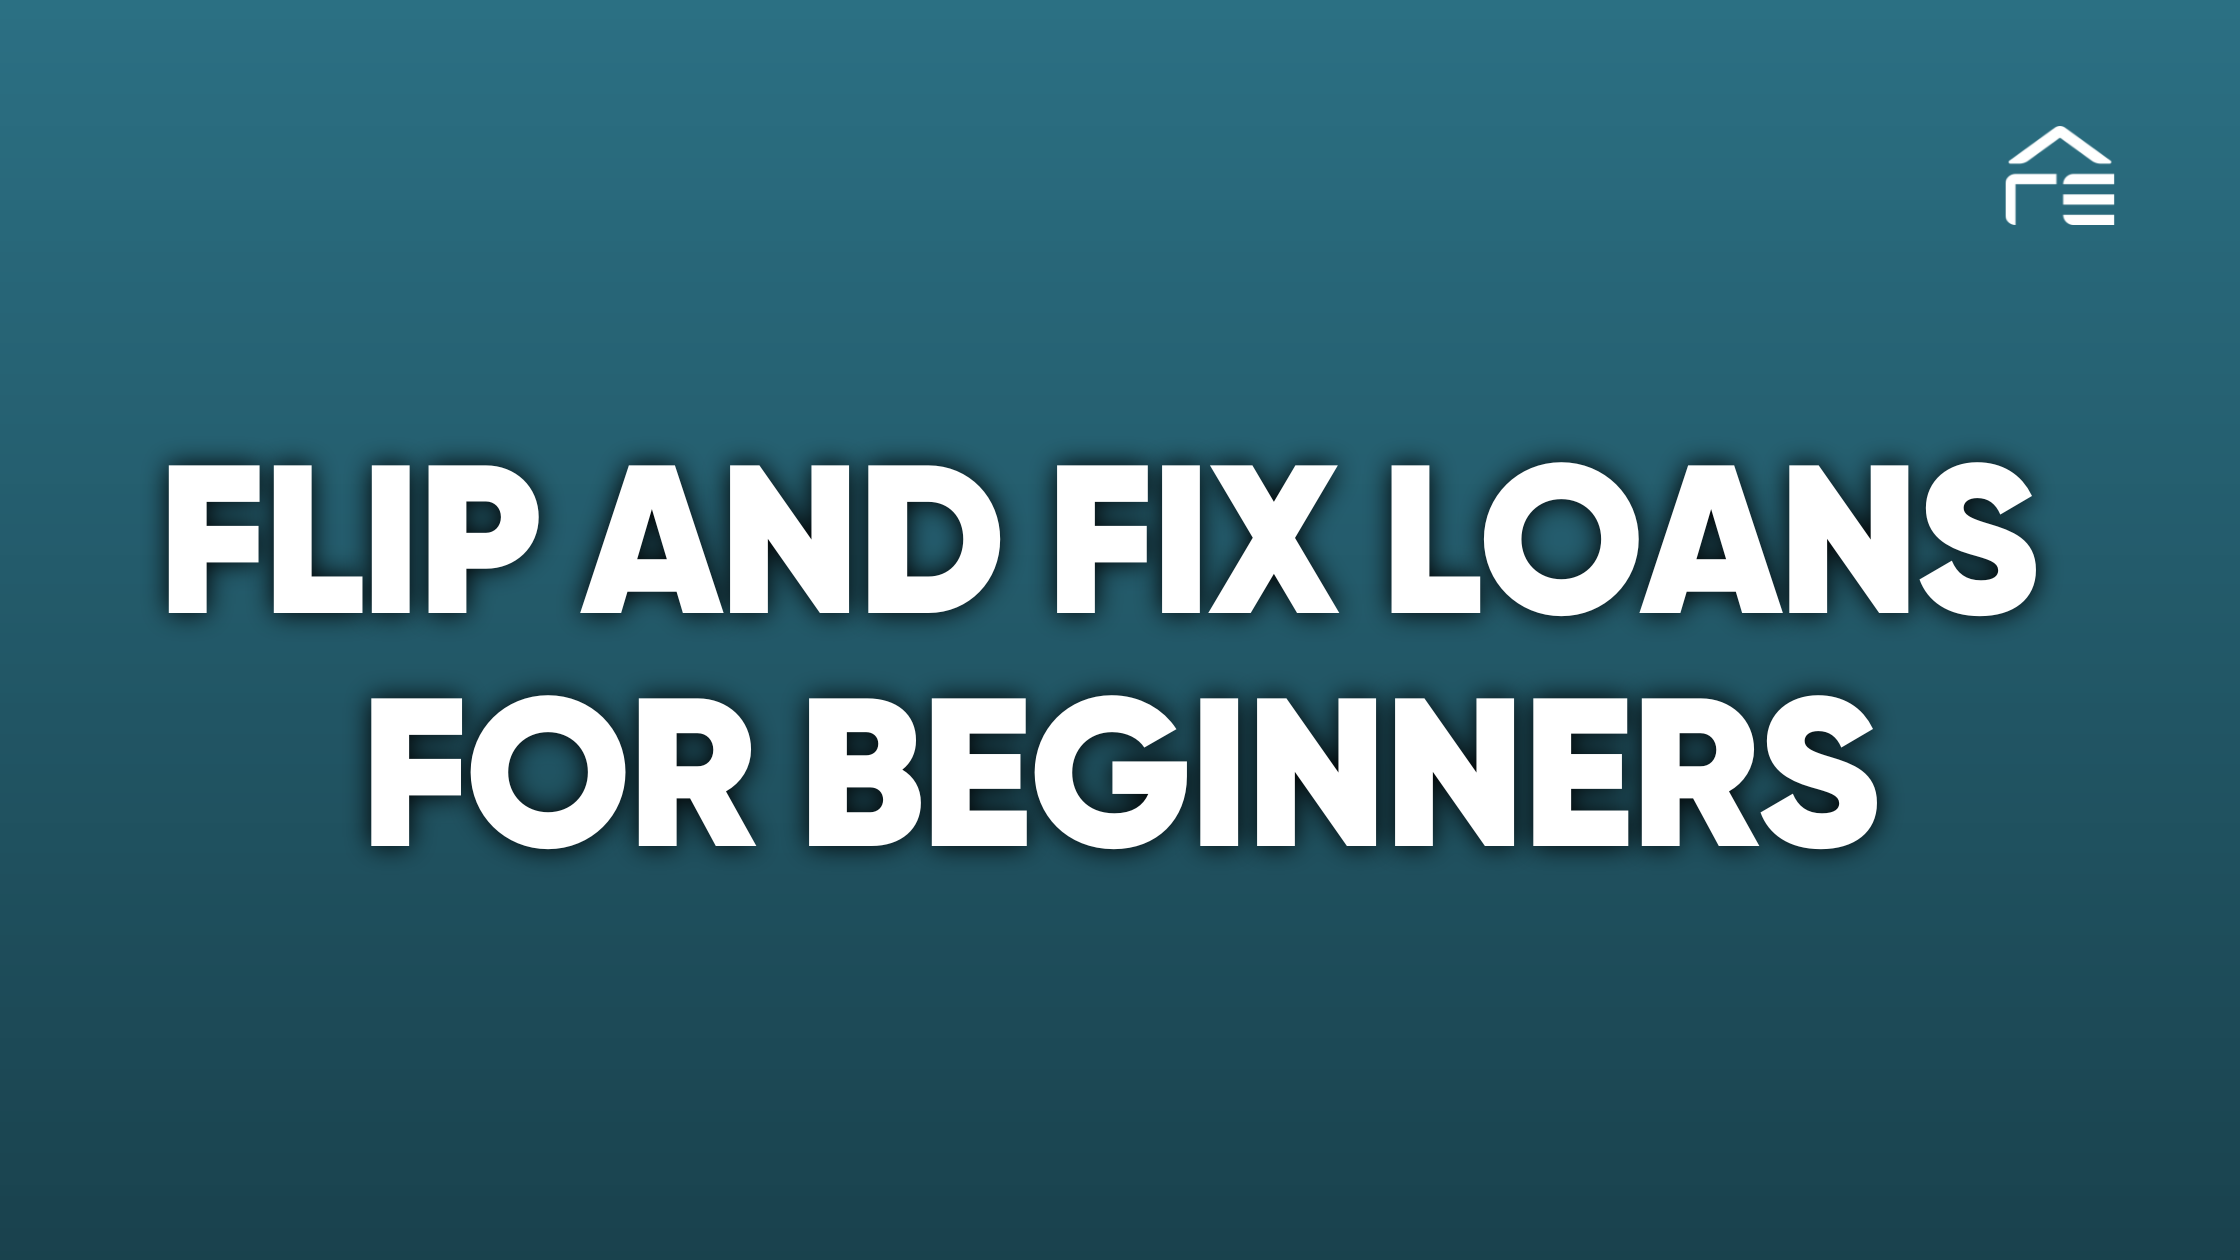 The Guide to Flip and Fix Loans for Beginners